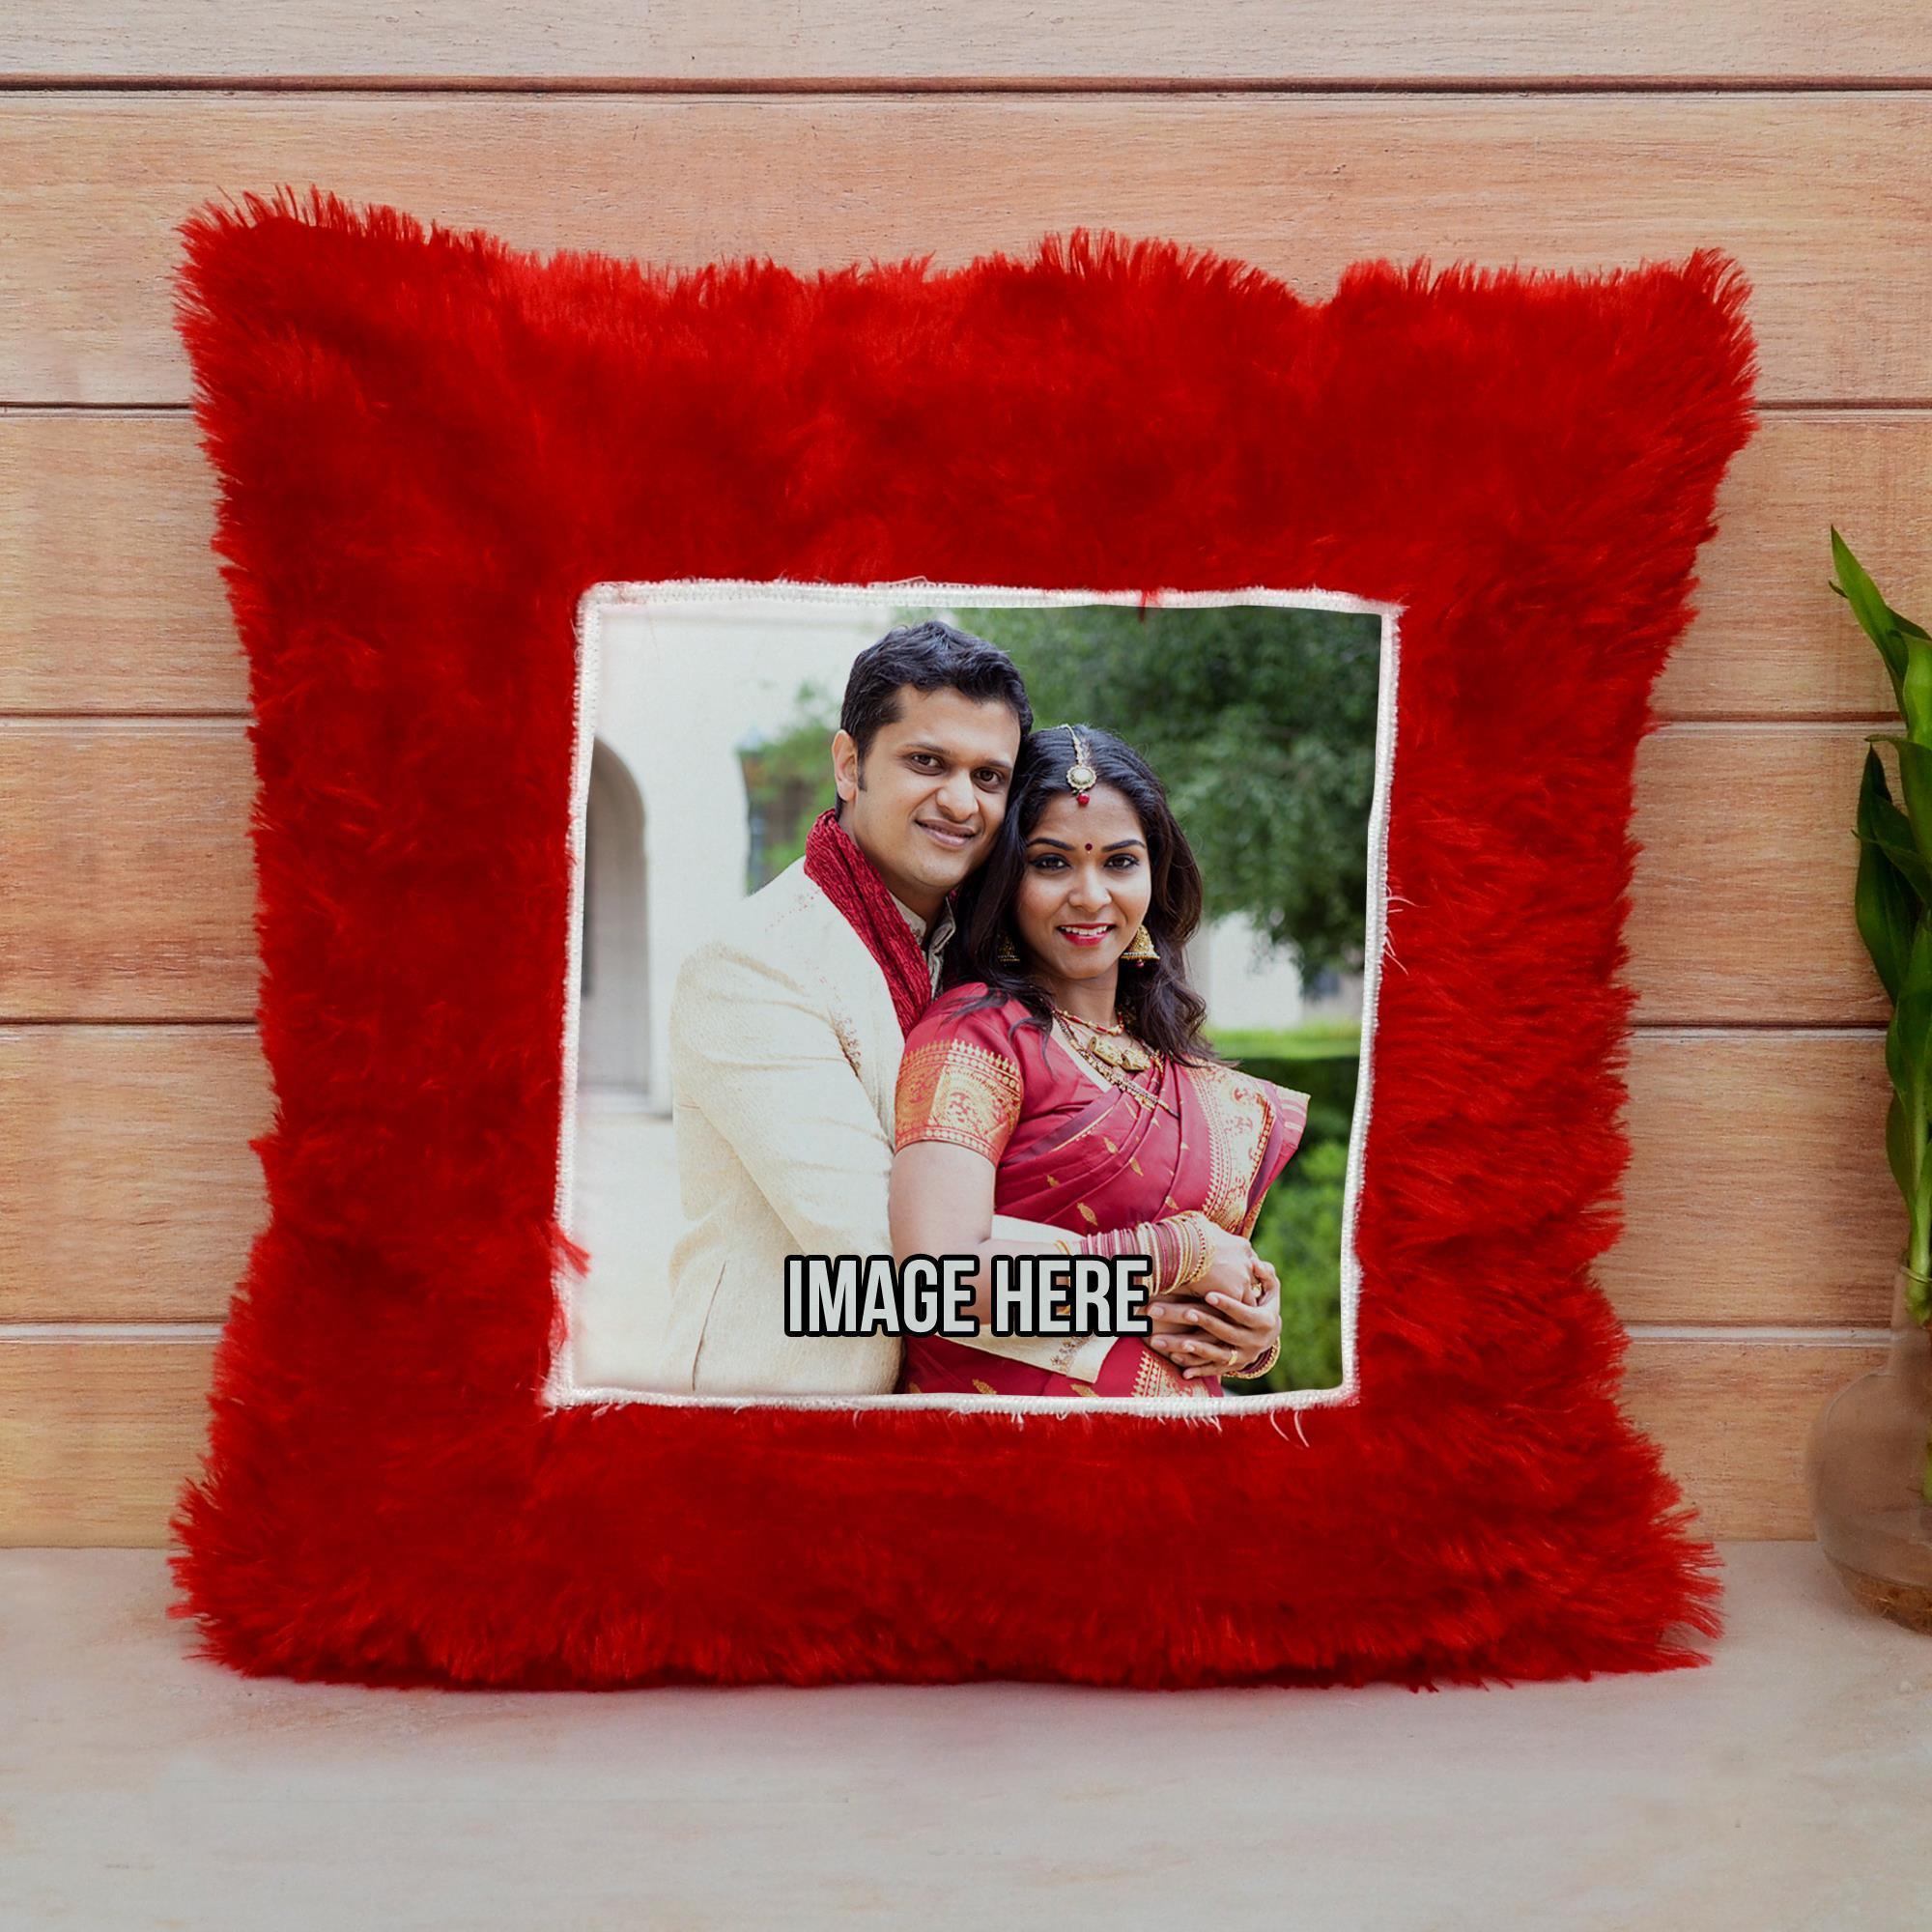 Red Personalized Pillow, Personalized Pillows